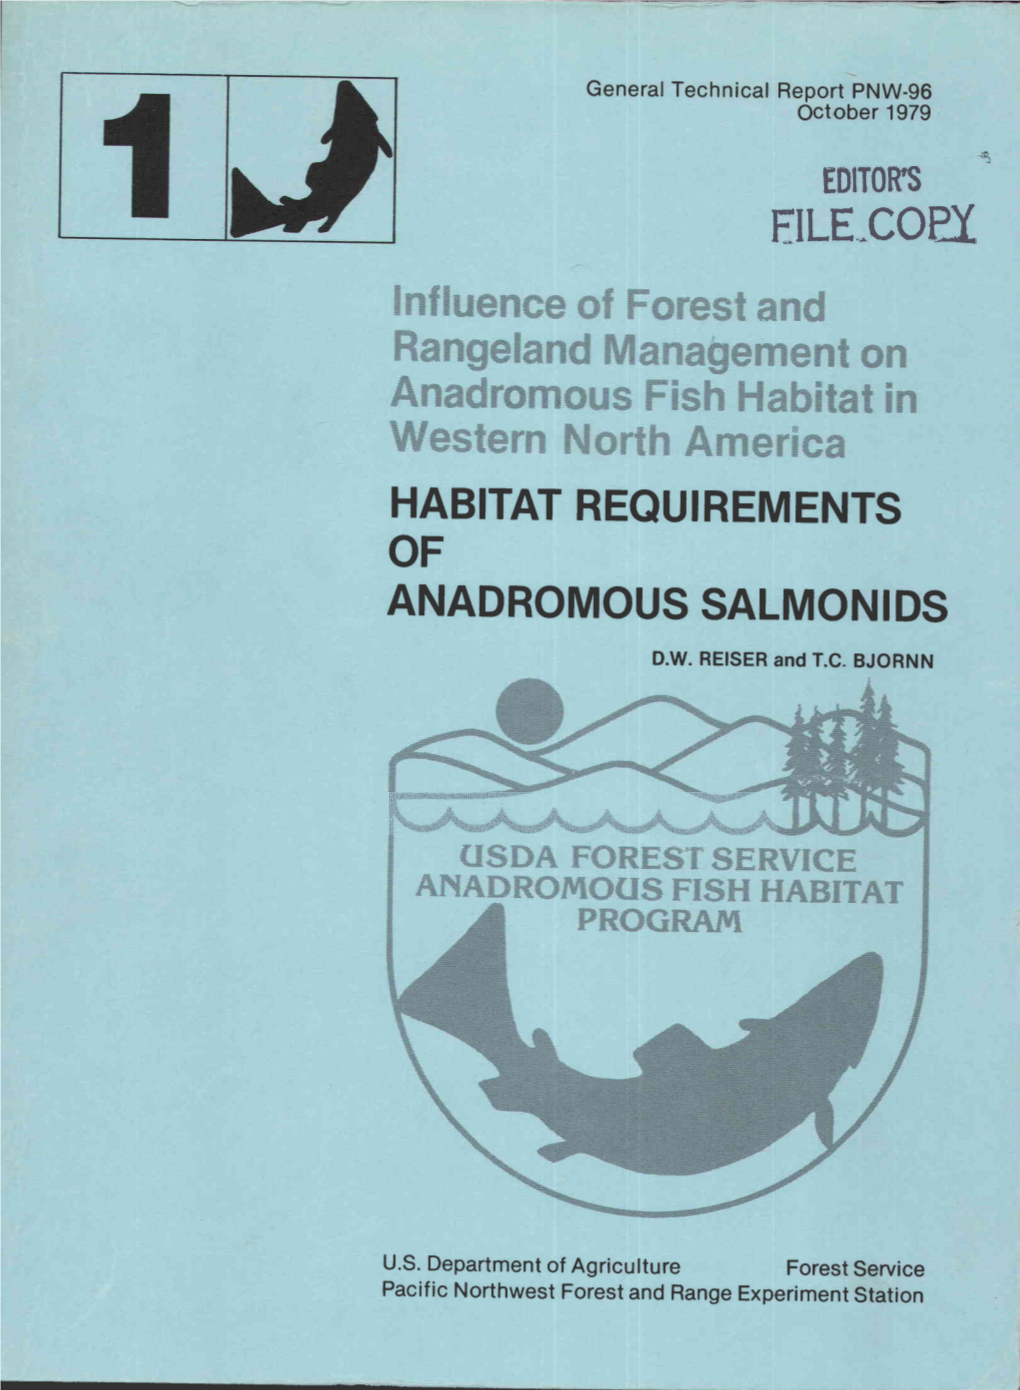 Uence of Forest and Rangeland Management an Anadromous Fish Habitat in Western North America HABITAT REQUIREMENTS of ANADROMOUS SALMONIDS